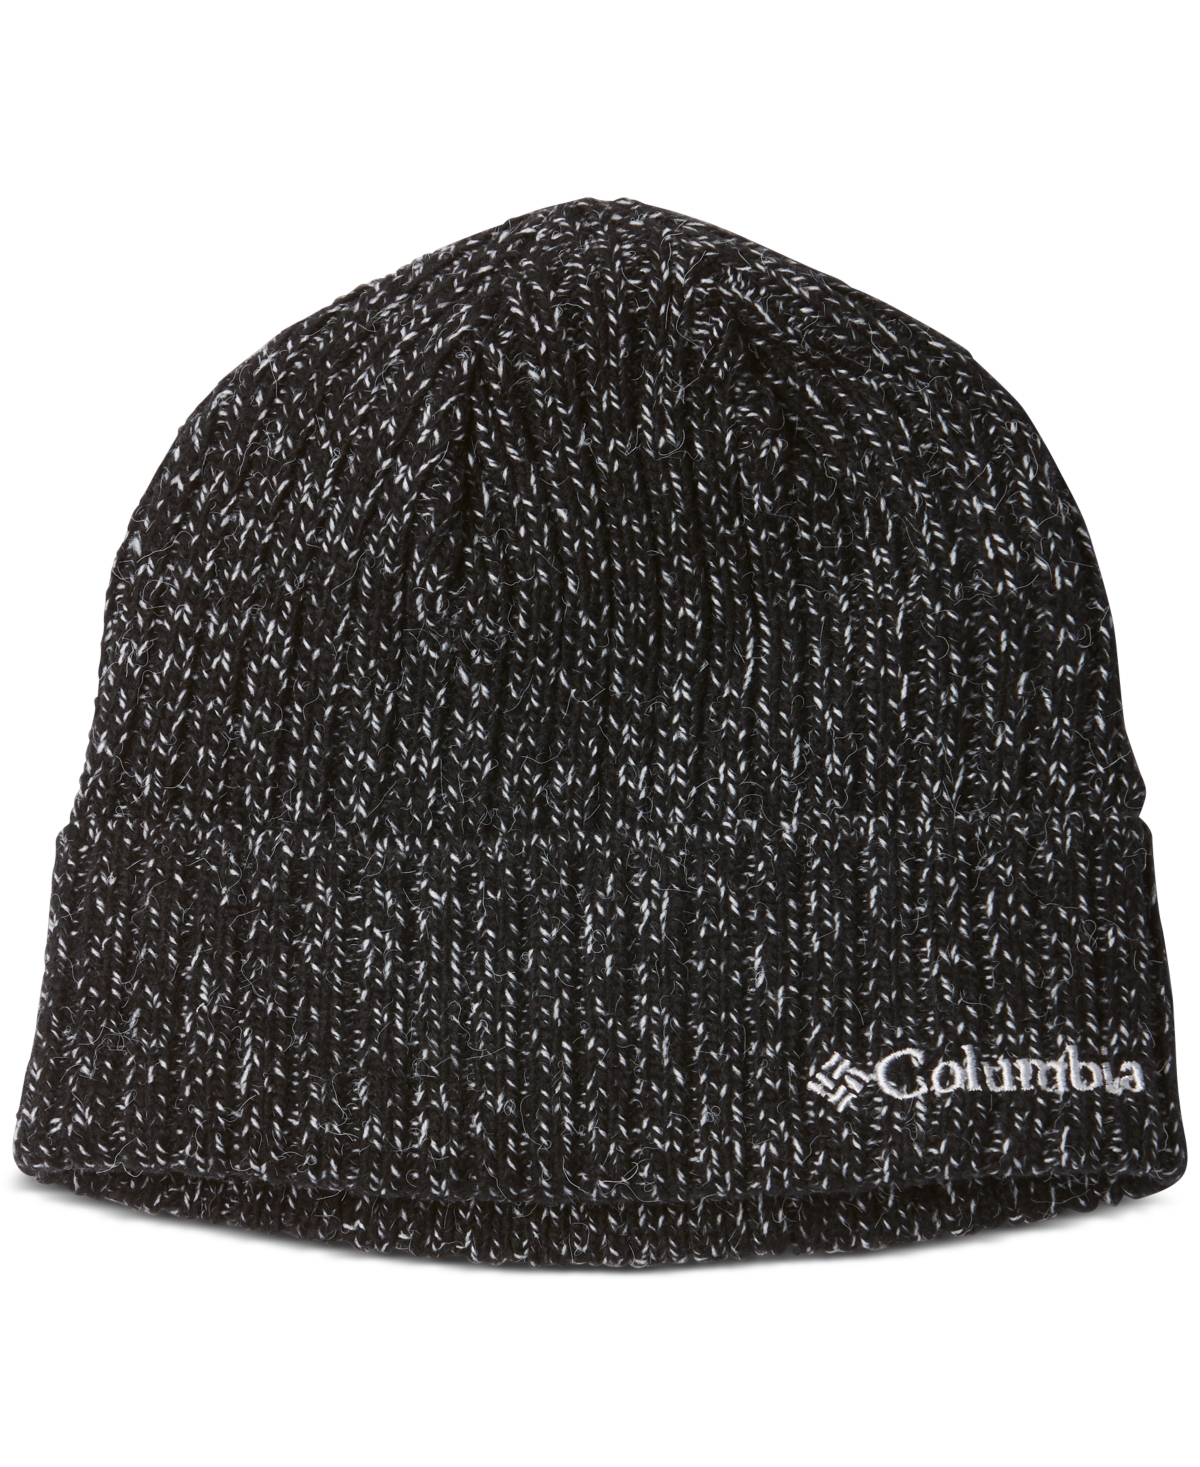 COLUMBIA MEN'S RIBBED-KNIT EMBROIDERED LOGO WATCH CAP